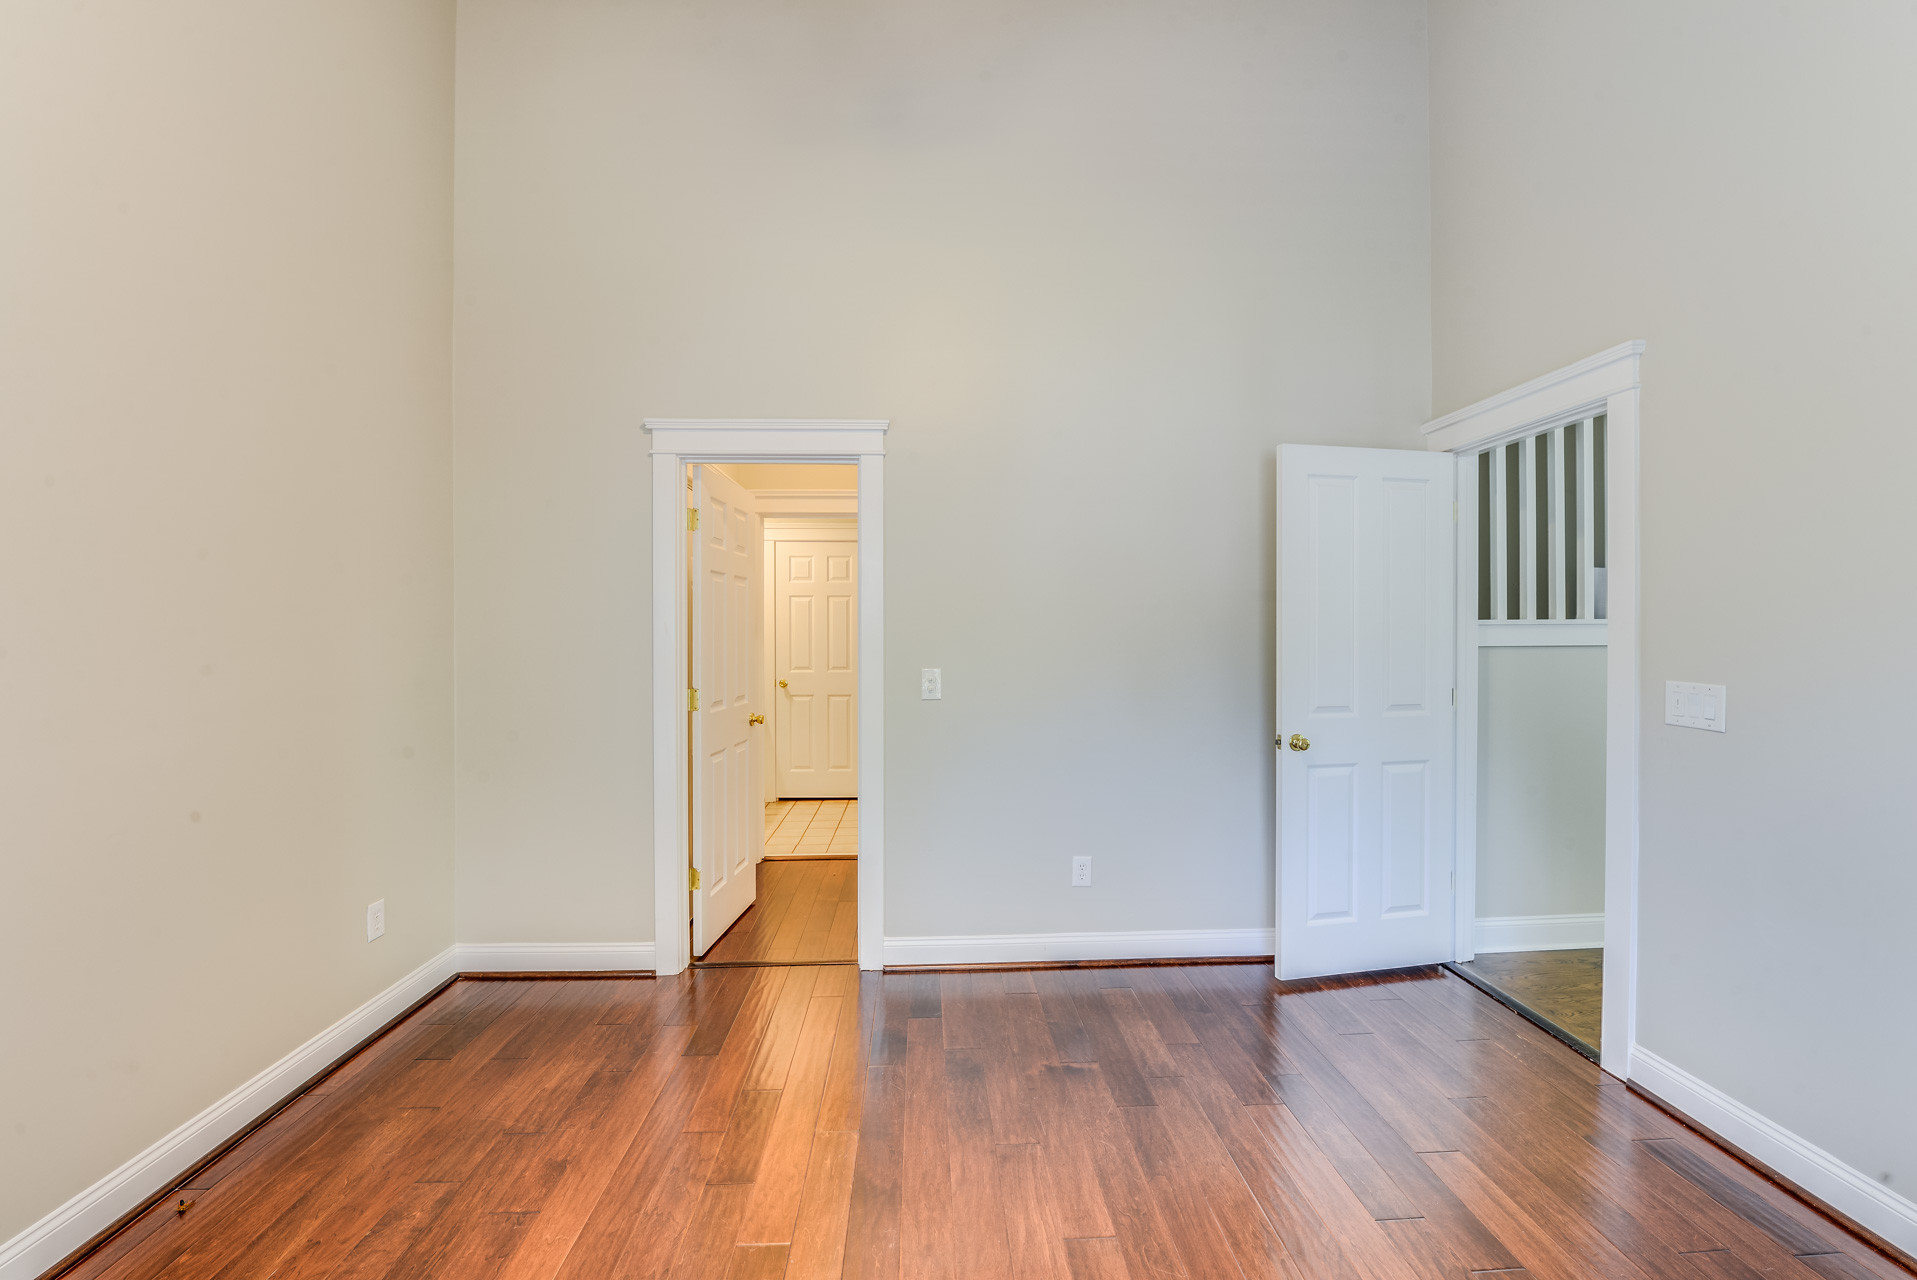 11 Recommended Hardwood Flooring Huntersville Nc 2024 free download hardwood flooring huntersville nc of 8311 townley rd huntersville nc 28078 realestate com in isapdcxfhnujn20000000000